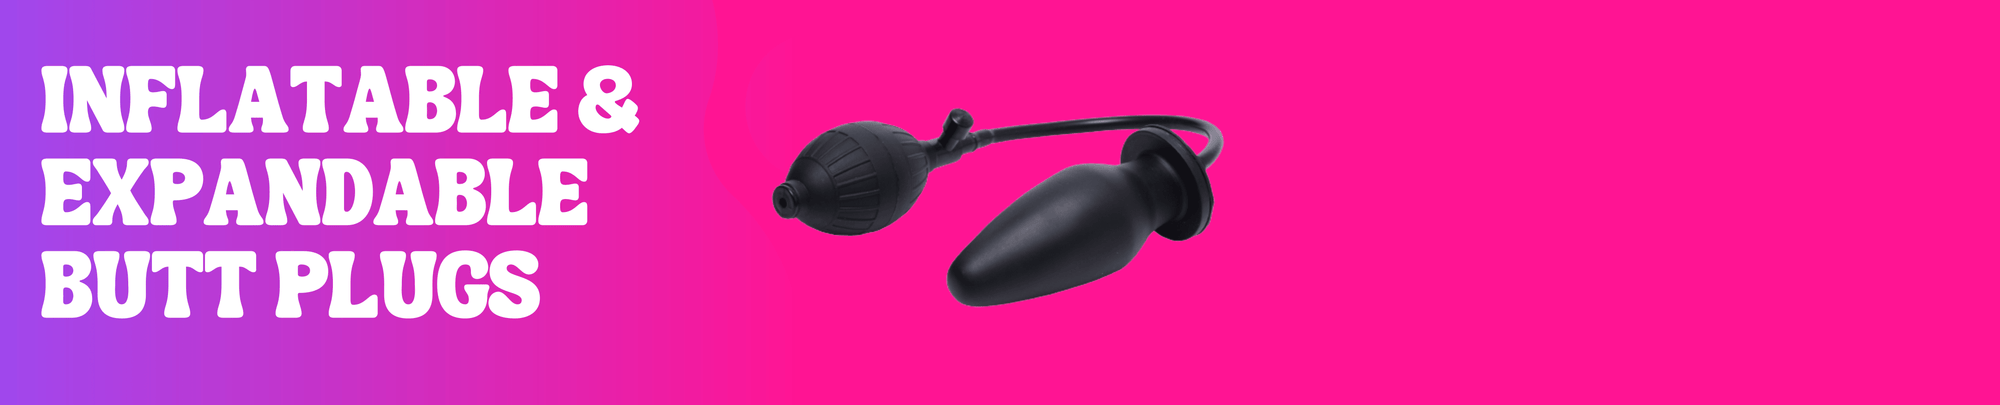 Inflatable &amp; Expandable Butt Plugs